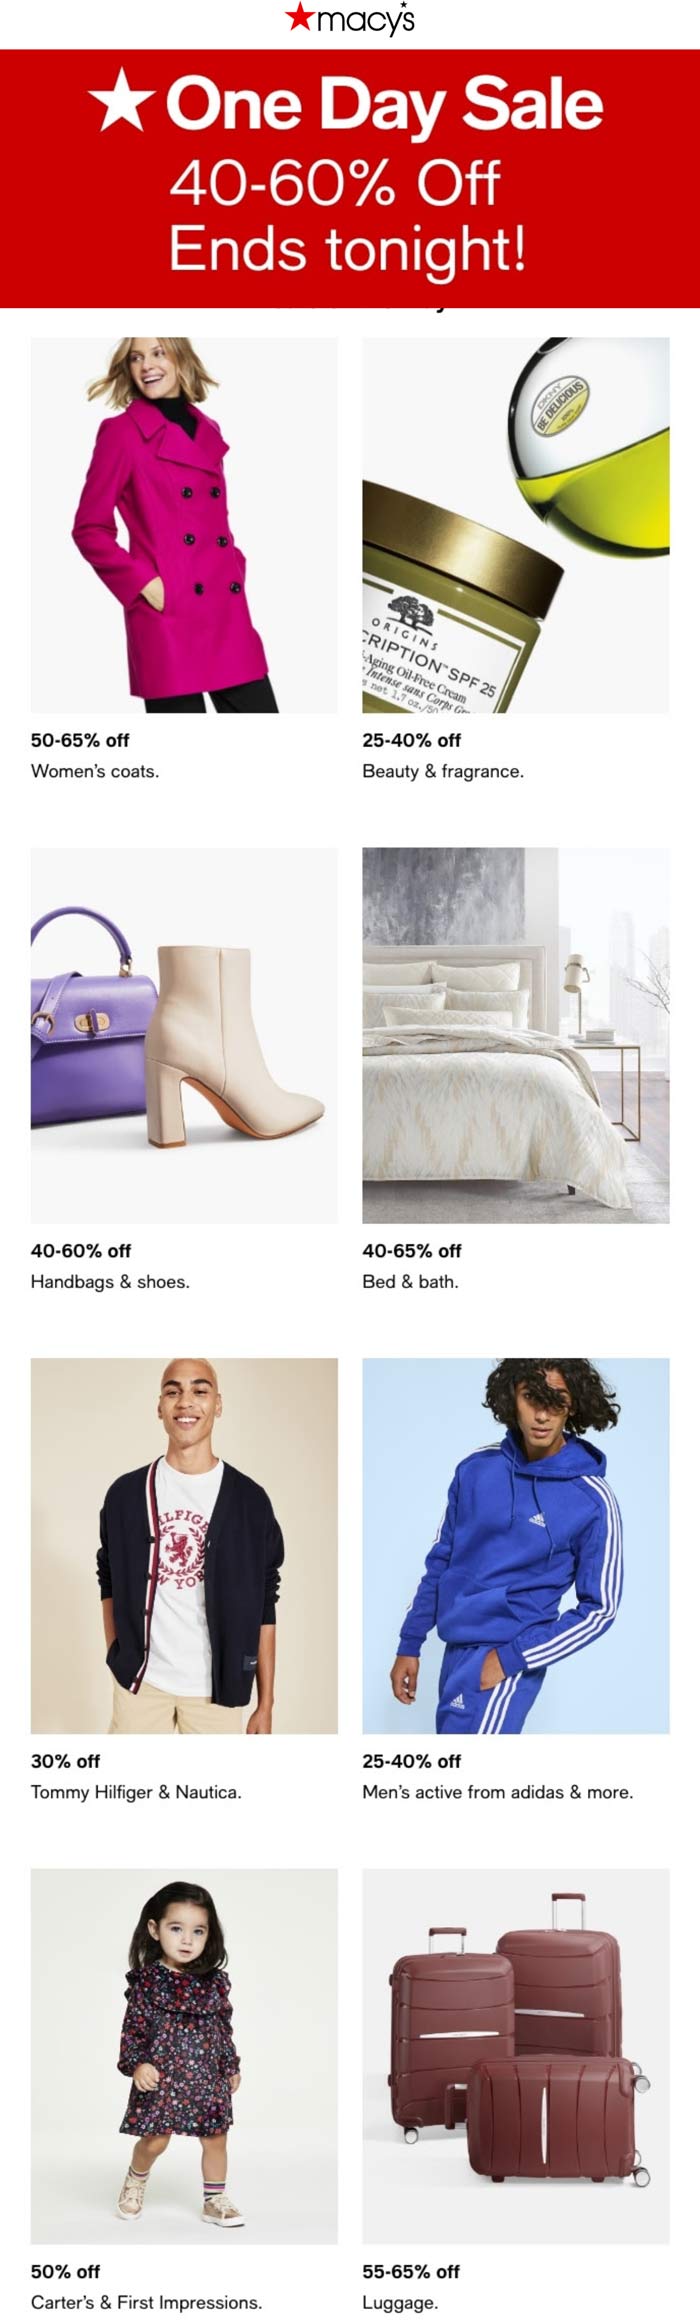 Macys stores Coupon  One day sale 40-60% off activewear, shoes, bed, handbags & more today at Macys #macys 